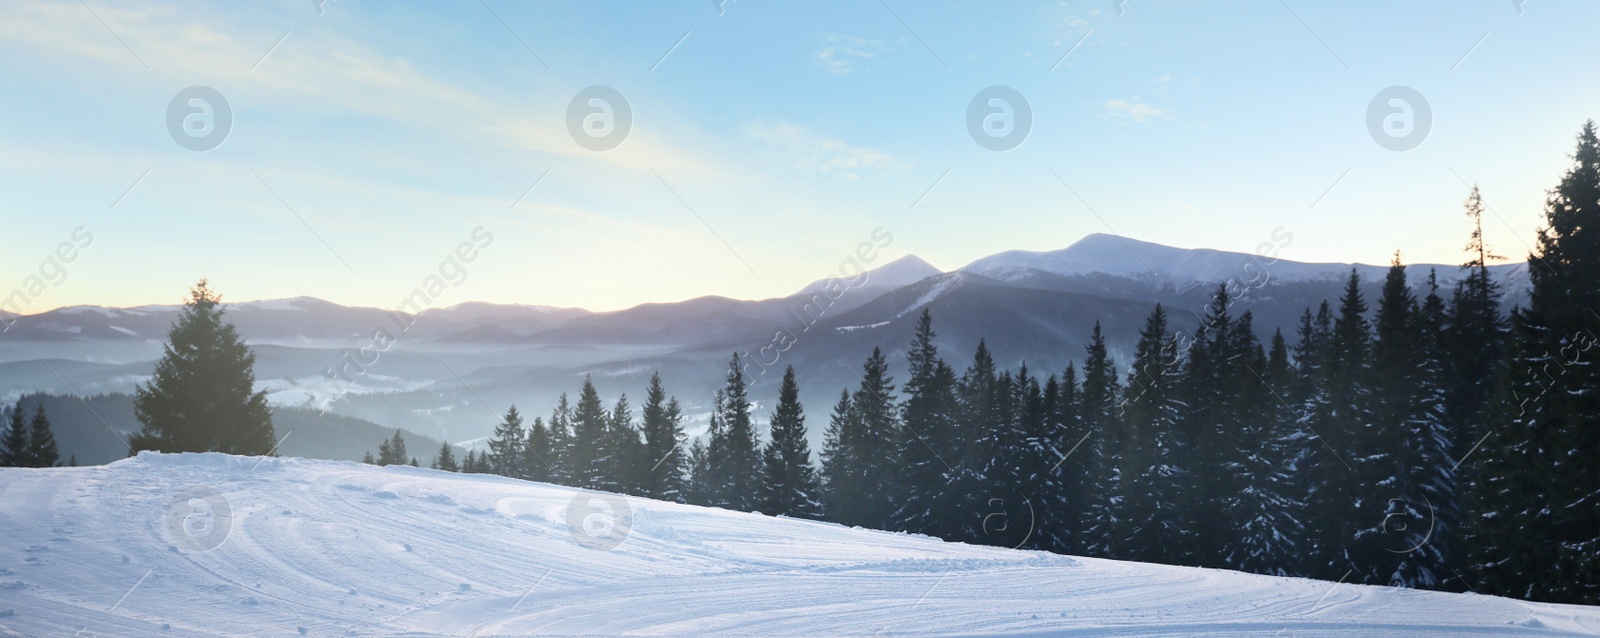 Image of Picturesque view of snowy hill and conifer forest. Banner design